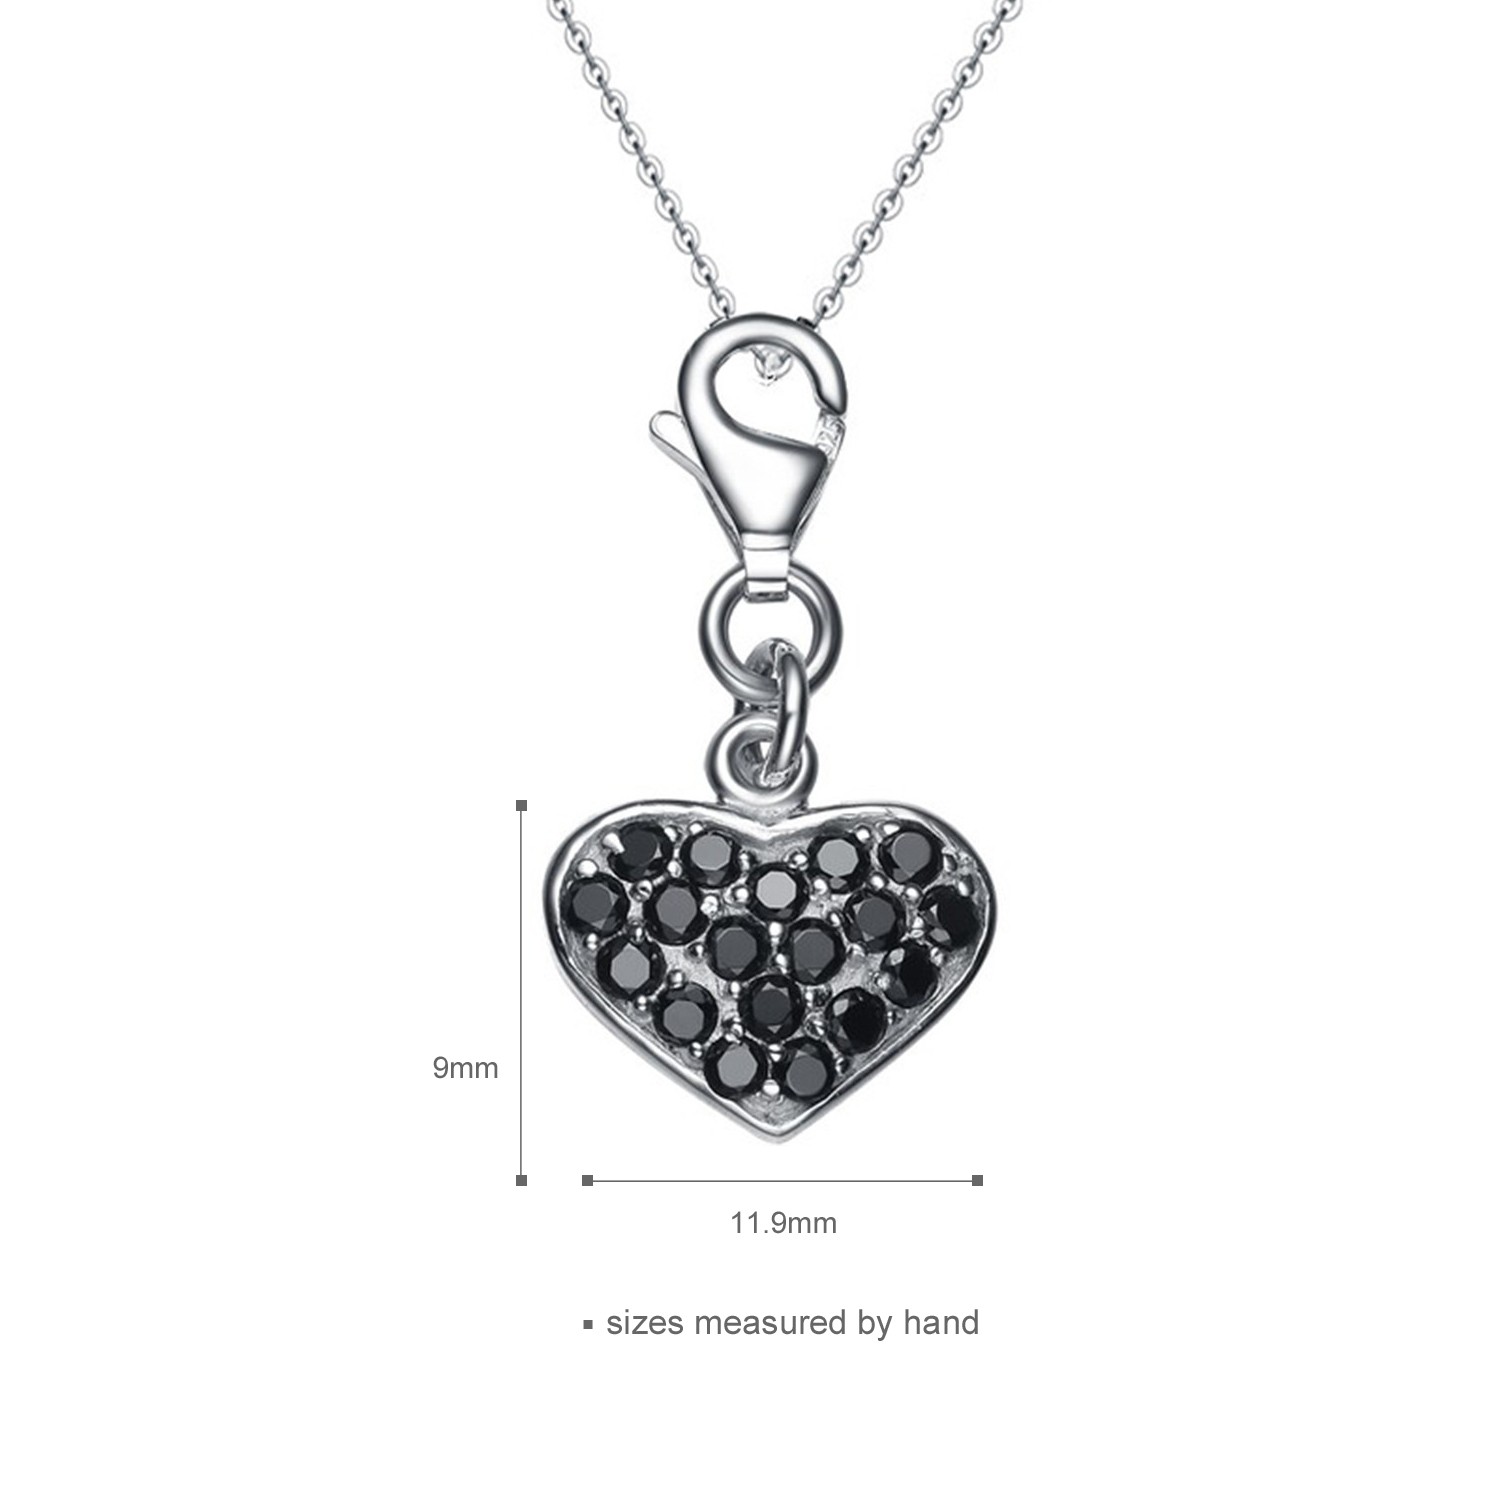 Jewelry Manufacturer Necklace Women 925 Sterling Silver Black Cubic Zirconia Heart Pendant Necklace